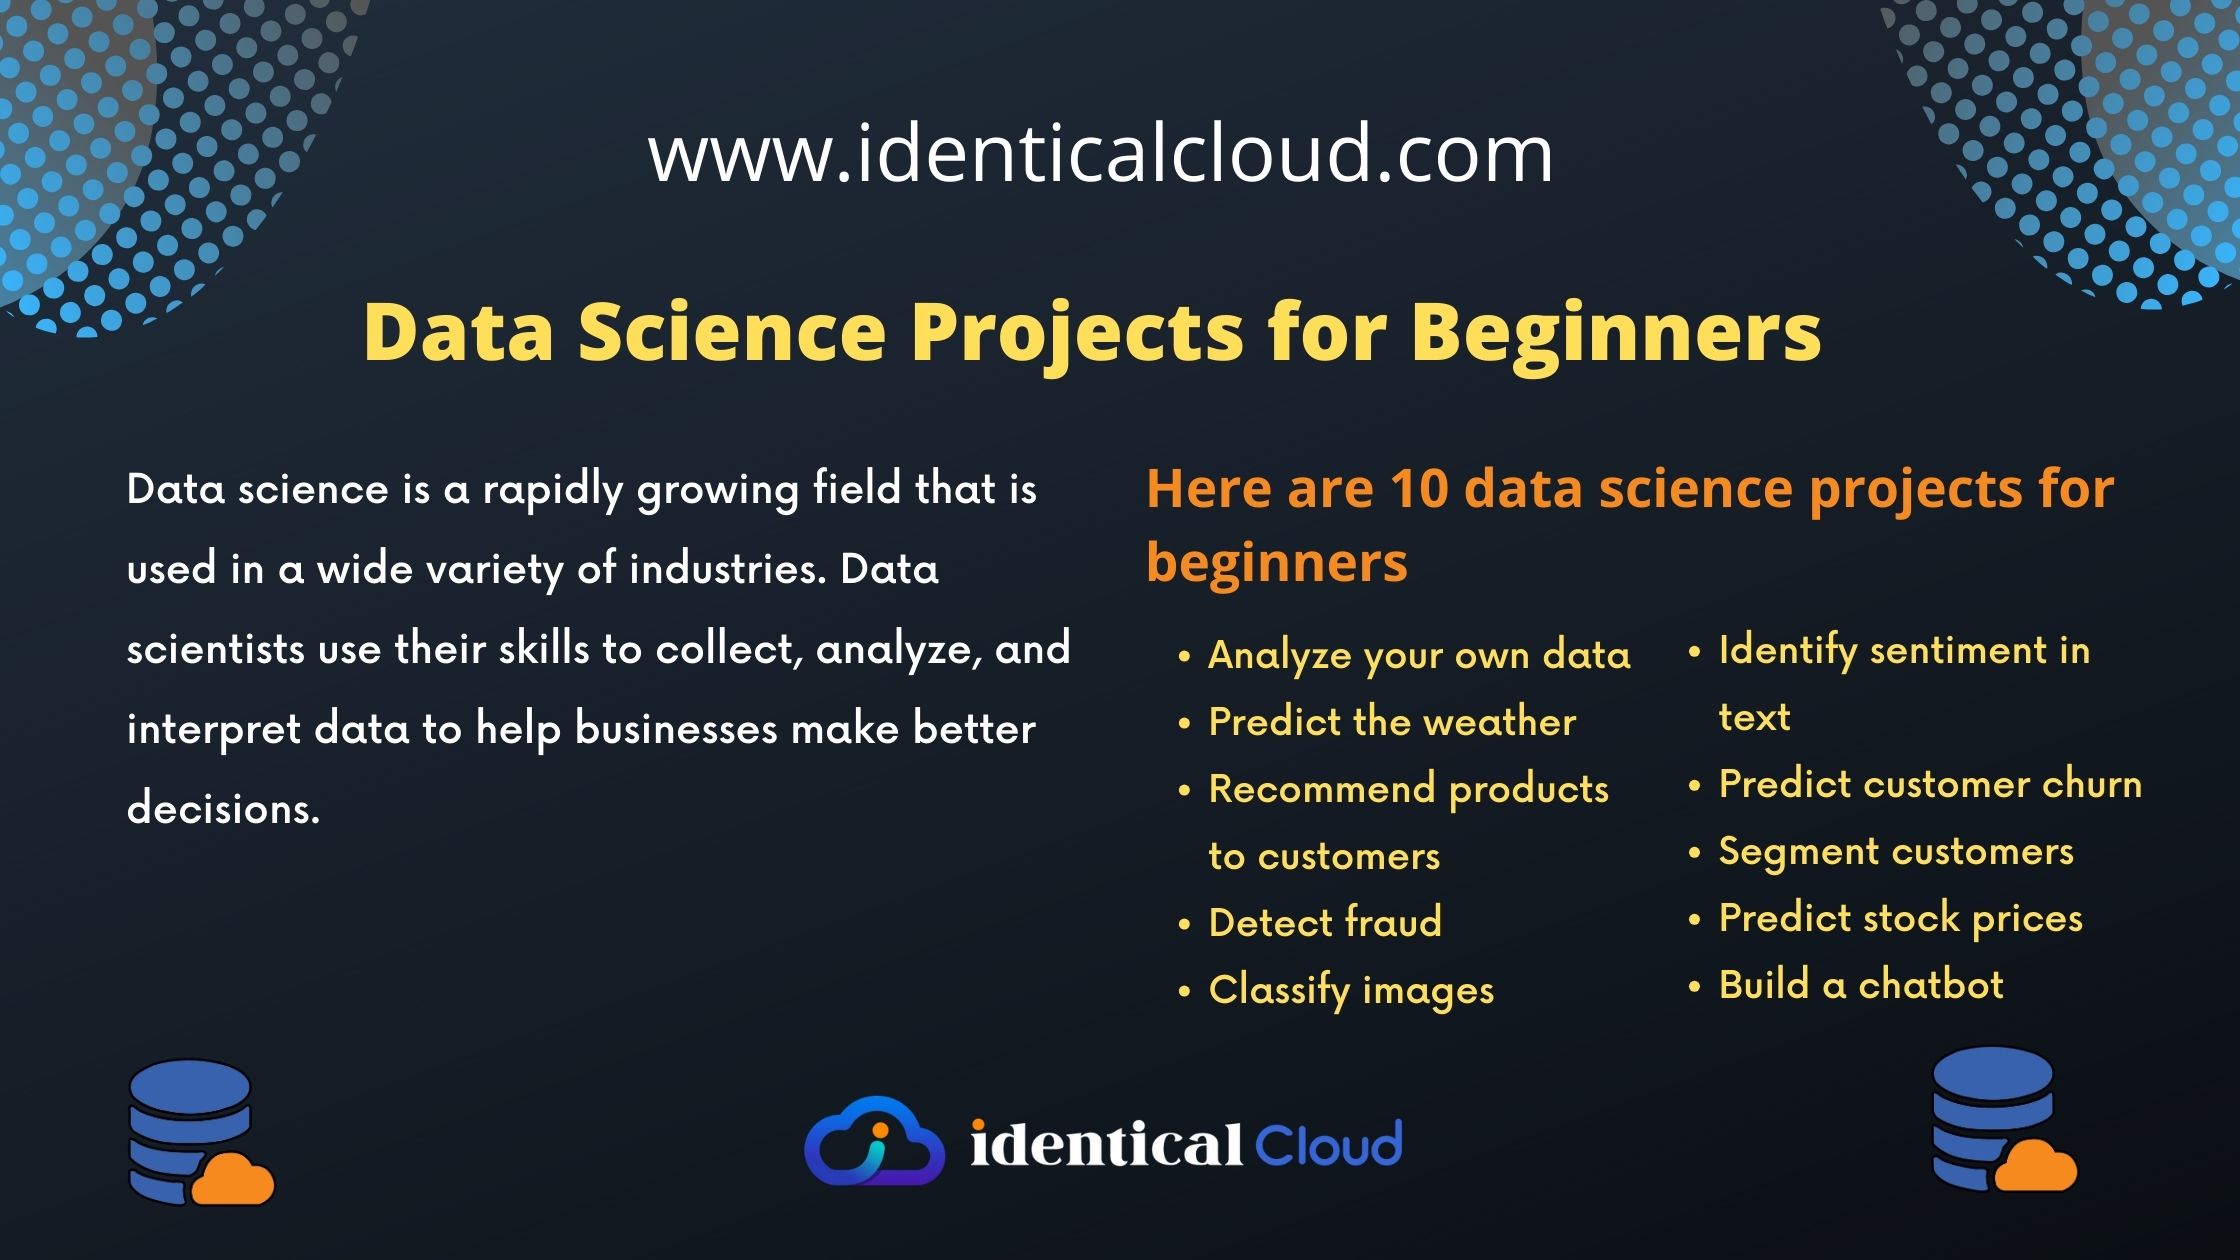 Data Science Projects for Beginners - identicalcloud.com